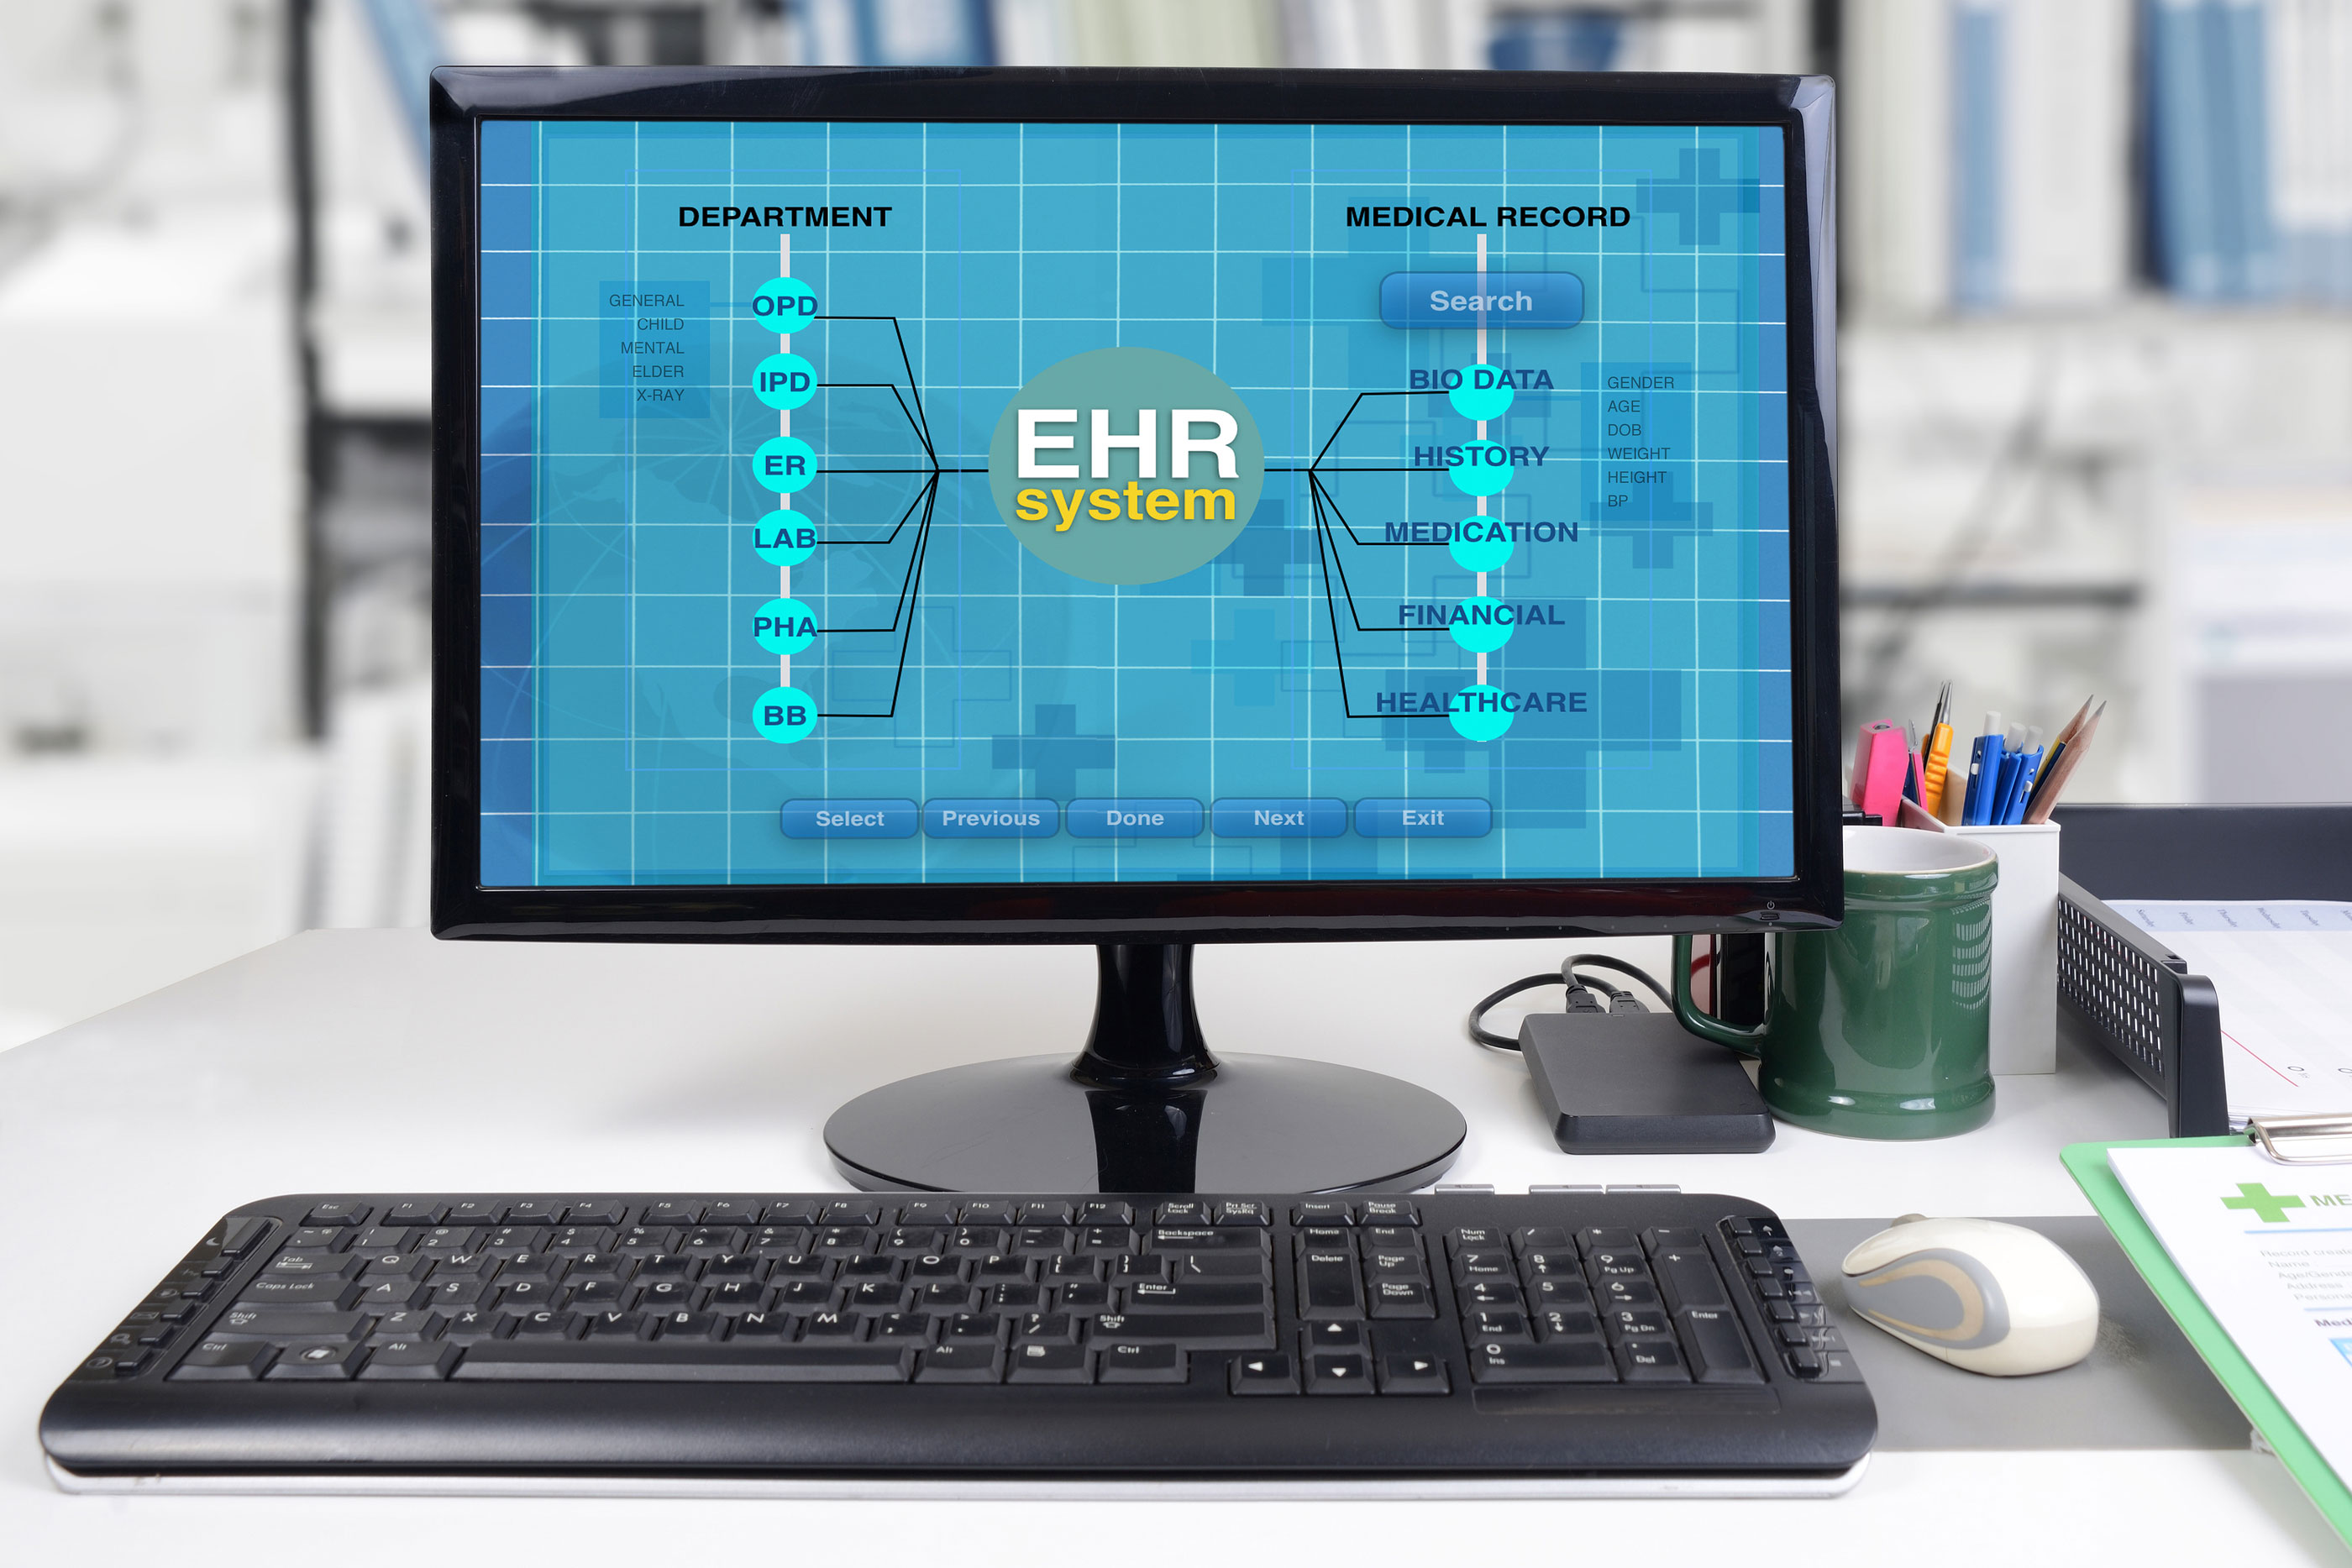 7 Major Benefits of a Well-Optimized EHR System